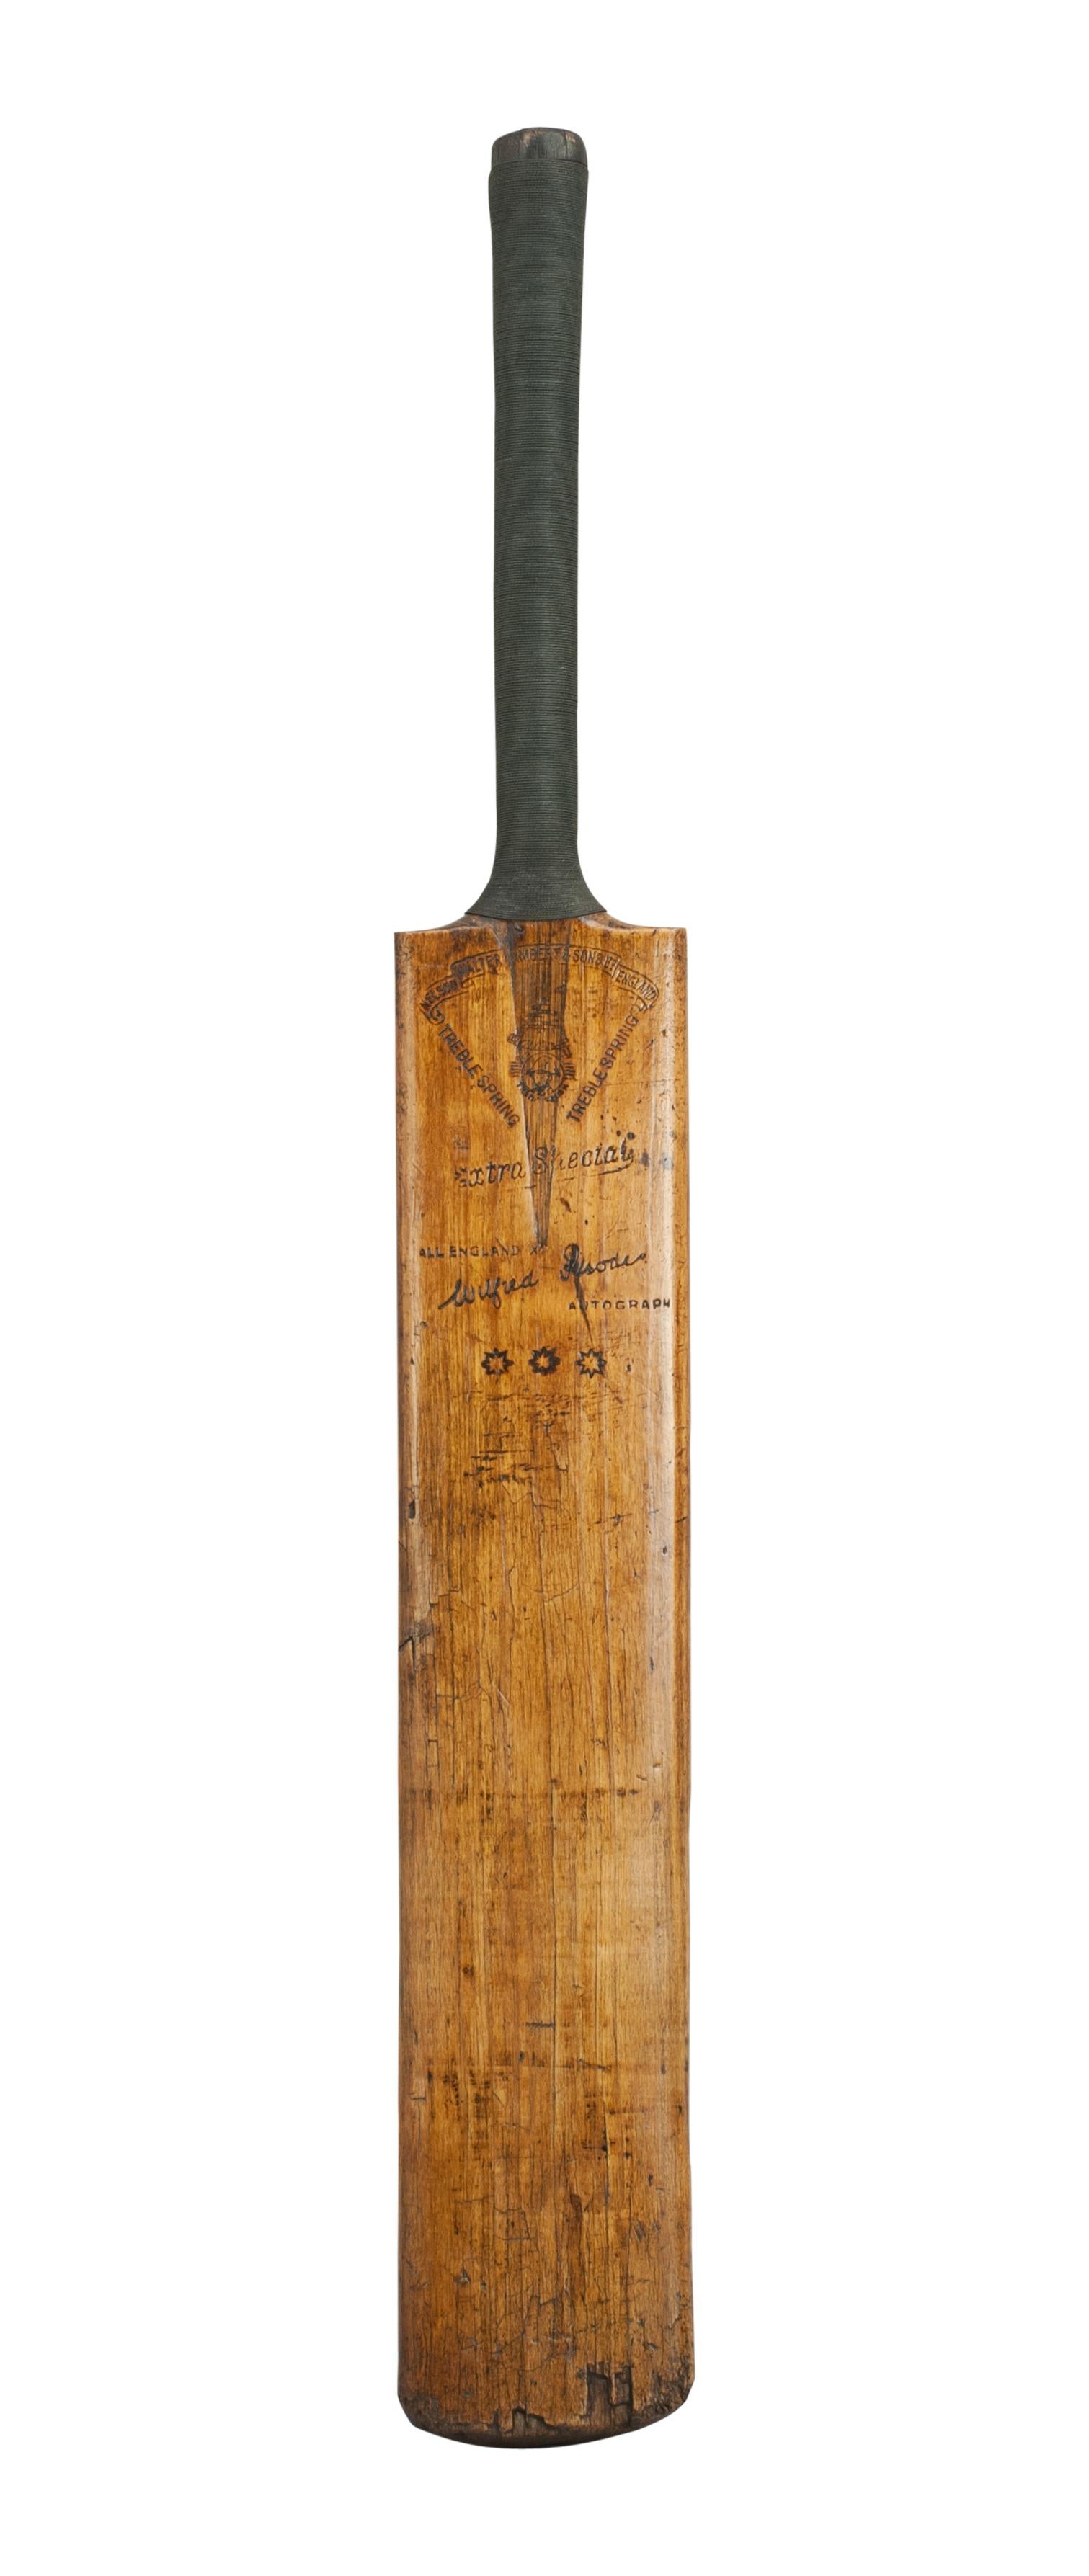 A good cricket bat with nice colour and new cord strung grip. The bat is stamped with the makers name on the top of the blade 'Walter Lambert & Sons Ltd, Nelson England' and their trade mark stamp in the middle of the blade. Embossed on both sides